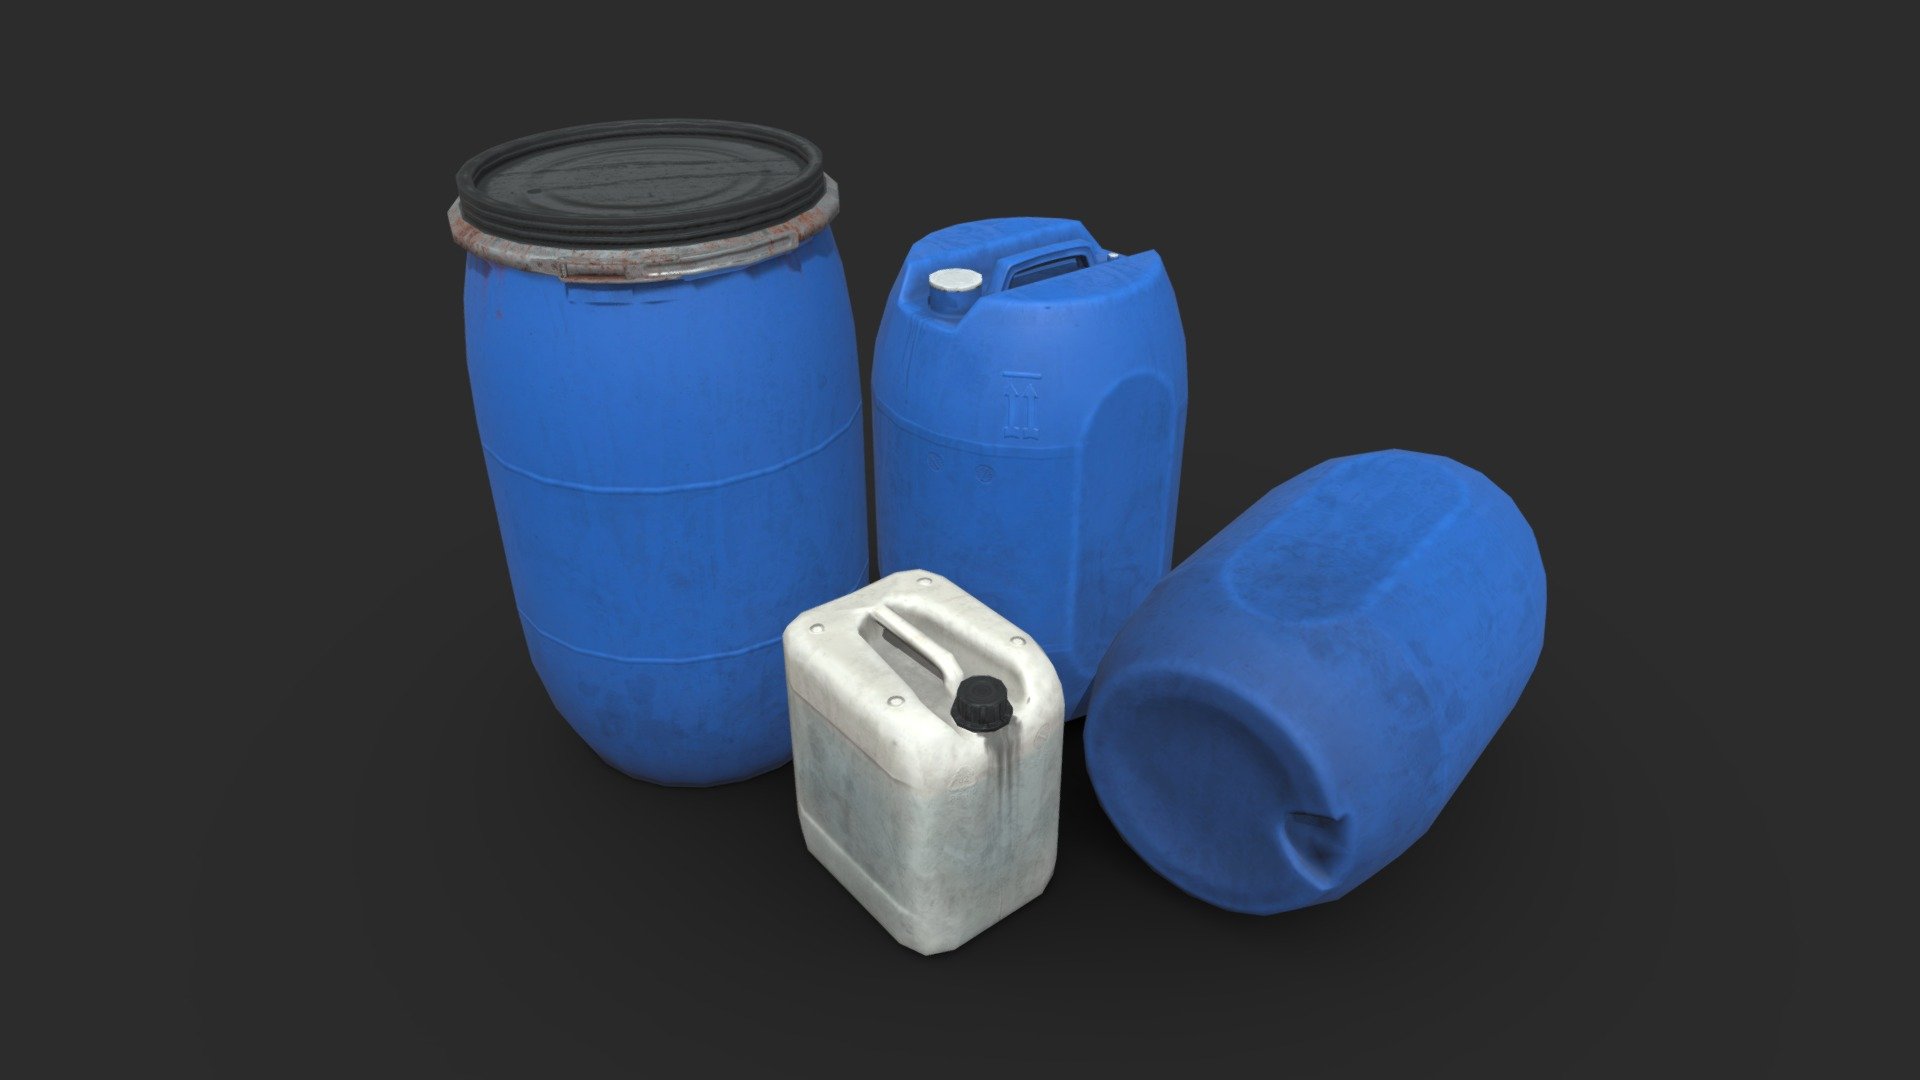 This industrial plastic containers set includes 3 individuals including for each 4 LODs and colliders to be ready for game and available in lowpoly and PBR ready. The set also includes 2 prefabs. 




3 individuals : 1223 polygons

2 prefabs : 4258 polygons

The asset is available in realistic style and can be used in any game (post-apo, first person shooter, GTA like, historical… ). All objects share a unique material for the best optimization for games.

Low-poly model &amp; Blender native 4.0

SPECIFICATIONS




Objects : 3

Polygons : 1223

GAME SPECS

LODs : Yes (inside FBX for Unity &amp; Unreal)
Numbers of LODs : 4
Collider : Yes

EXPORTED FORMATS




FBX

Collada

OBJ

TEXTURES




Materials in scene : 1

Textures sizes : 2K

Textures types : Base Color, Metallic, Roughness, Normal (DirectX &amp; OpenGL), Heigh, AO &amp; SSS (also Unity &amp; Unreal ARM workflow maps)

Textures format : PNG

GENERAL




Real scale : Yes
 - Plastic Containers Set 01 - Buy Royalty Free 3D model by KangaroOz 3D (@KangaroOz-3D) 3d model